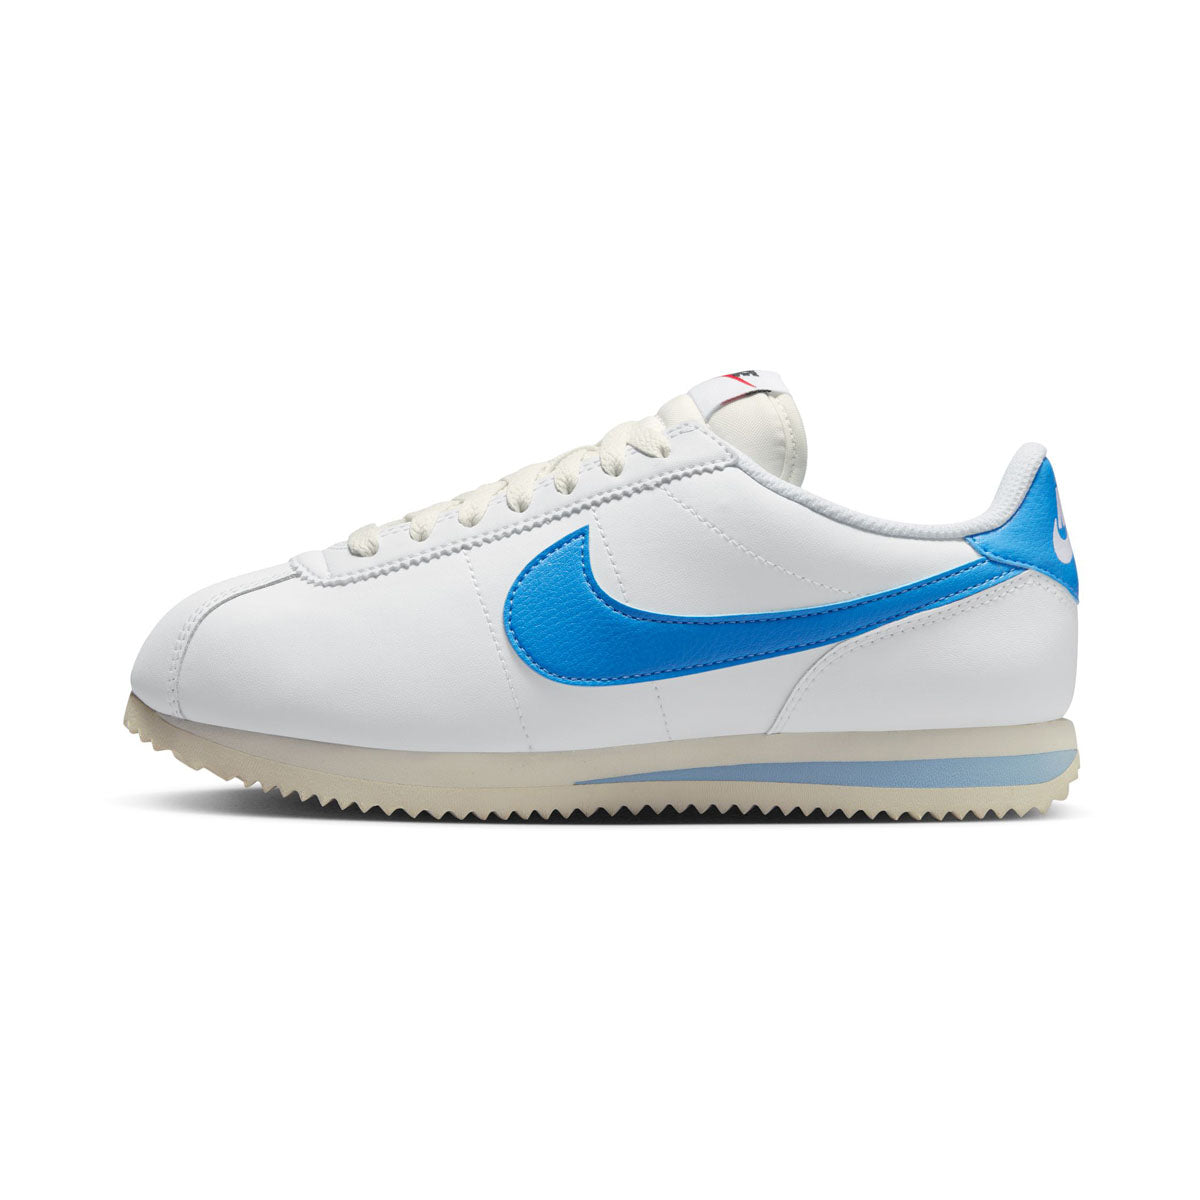 Buy Cortez Shoes: New Releases & Iconic Styles